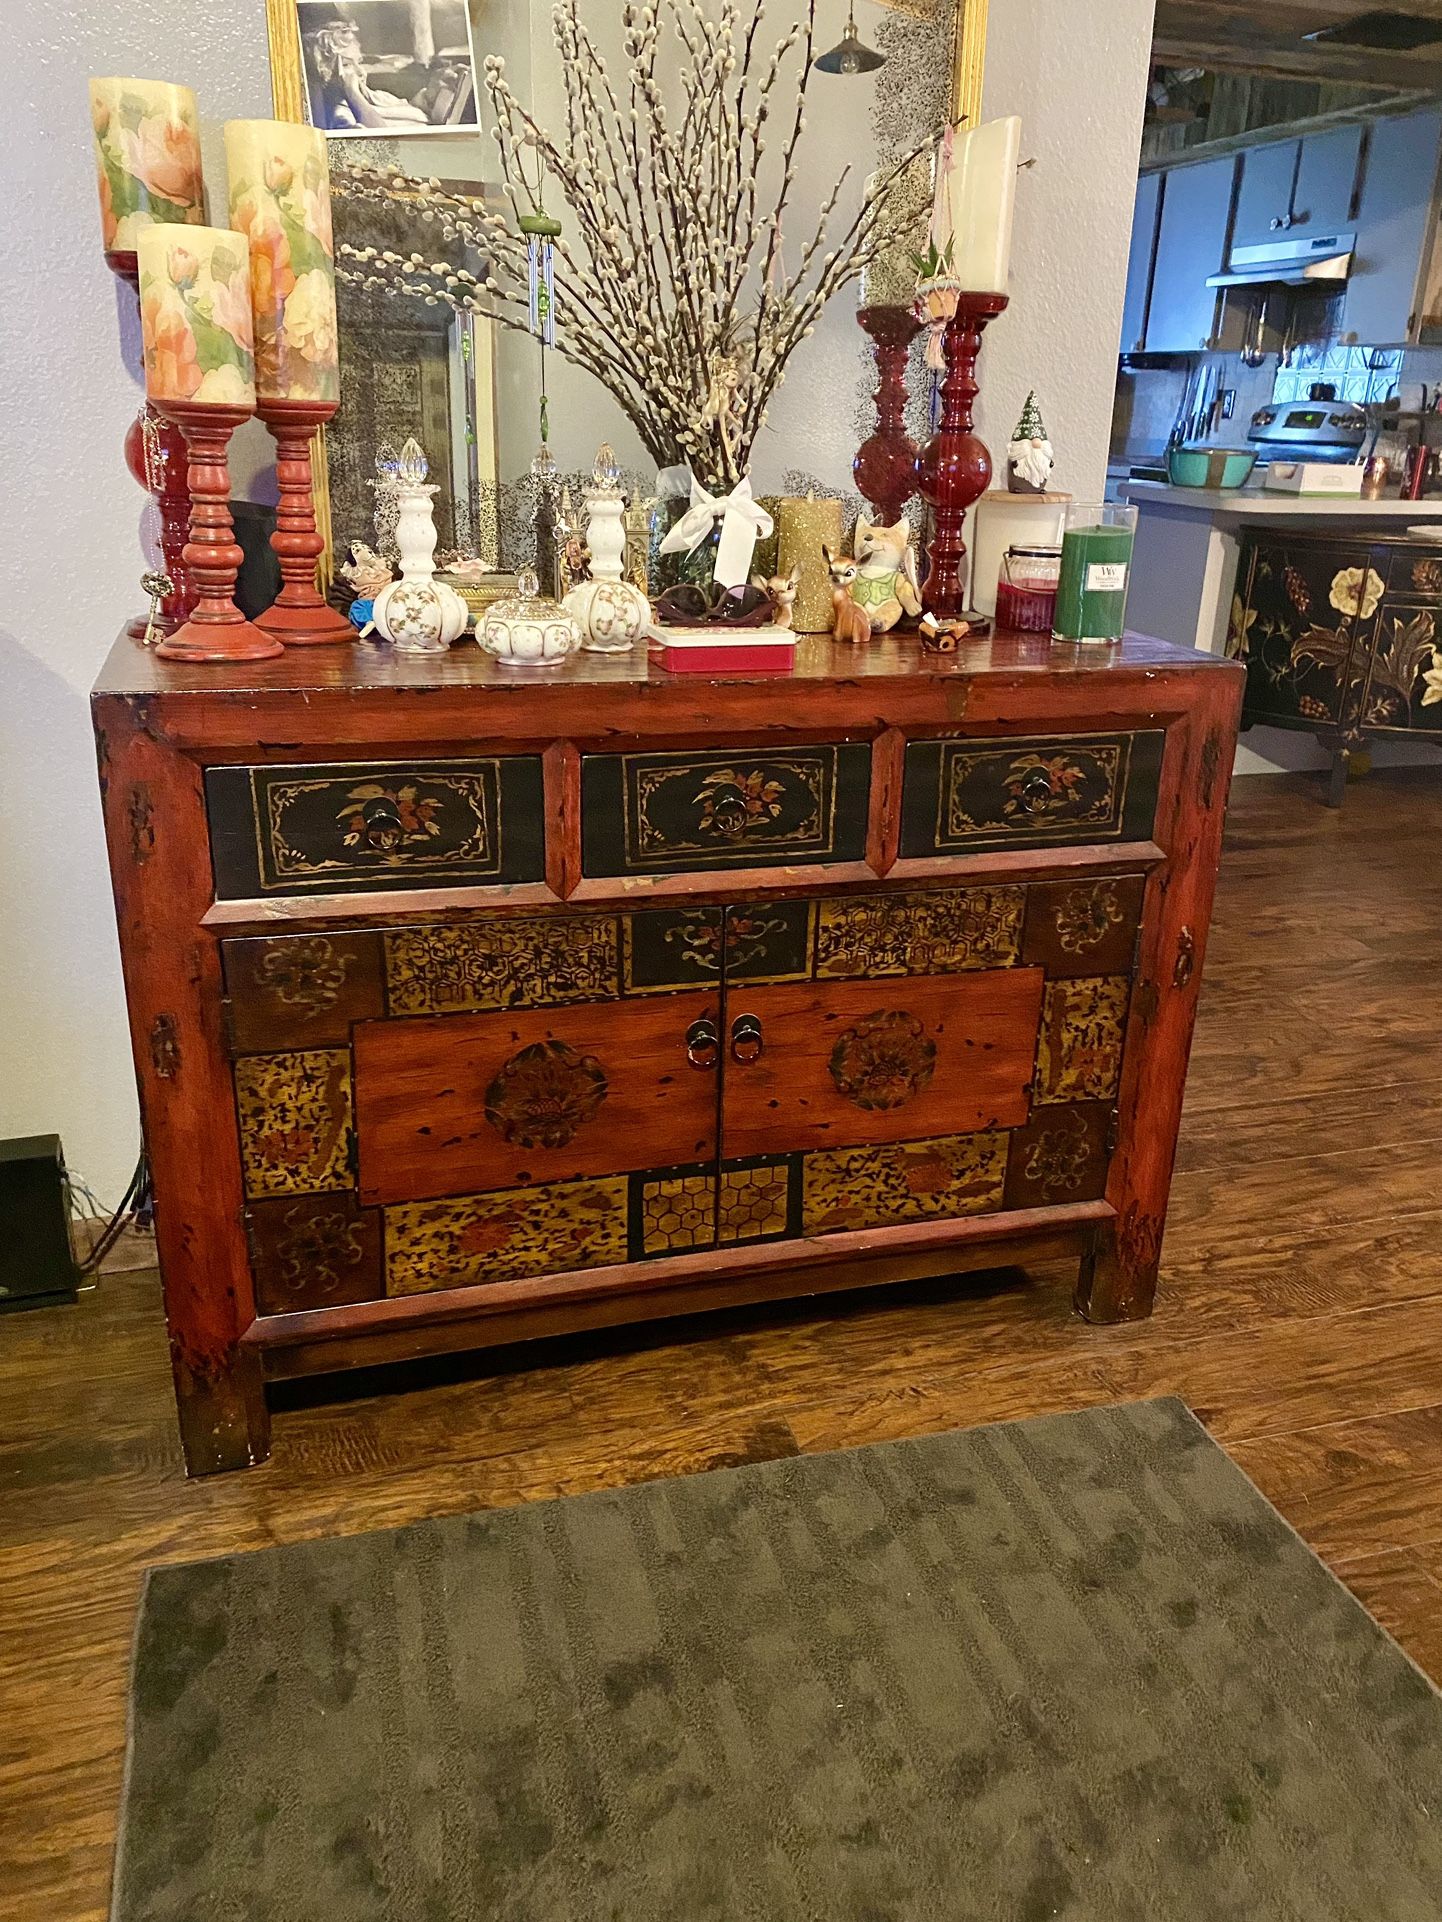 Beautiful Asian Themed Cabinet From Pier 1. Very Solid Heavy Wood.